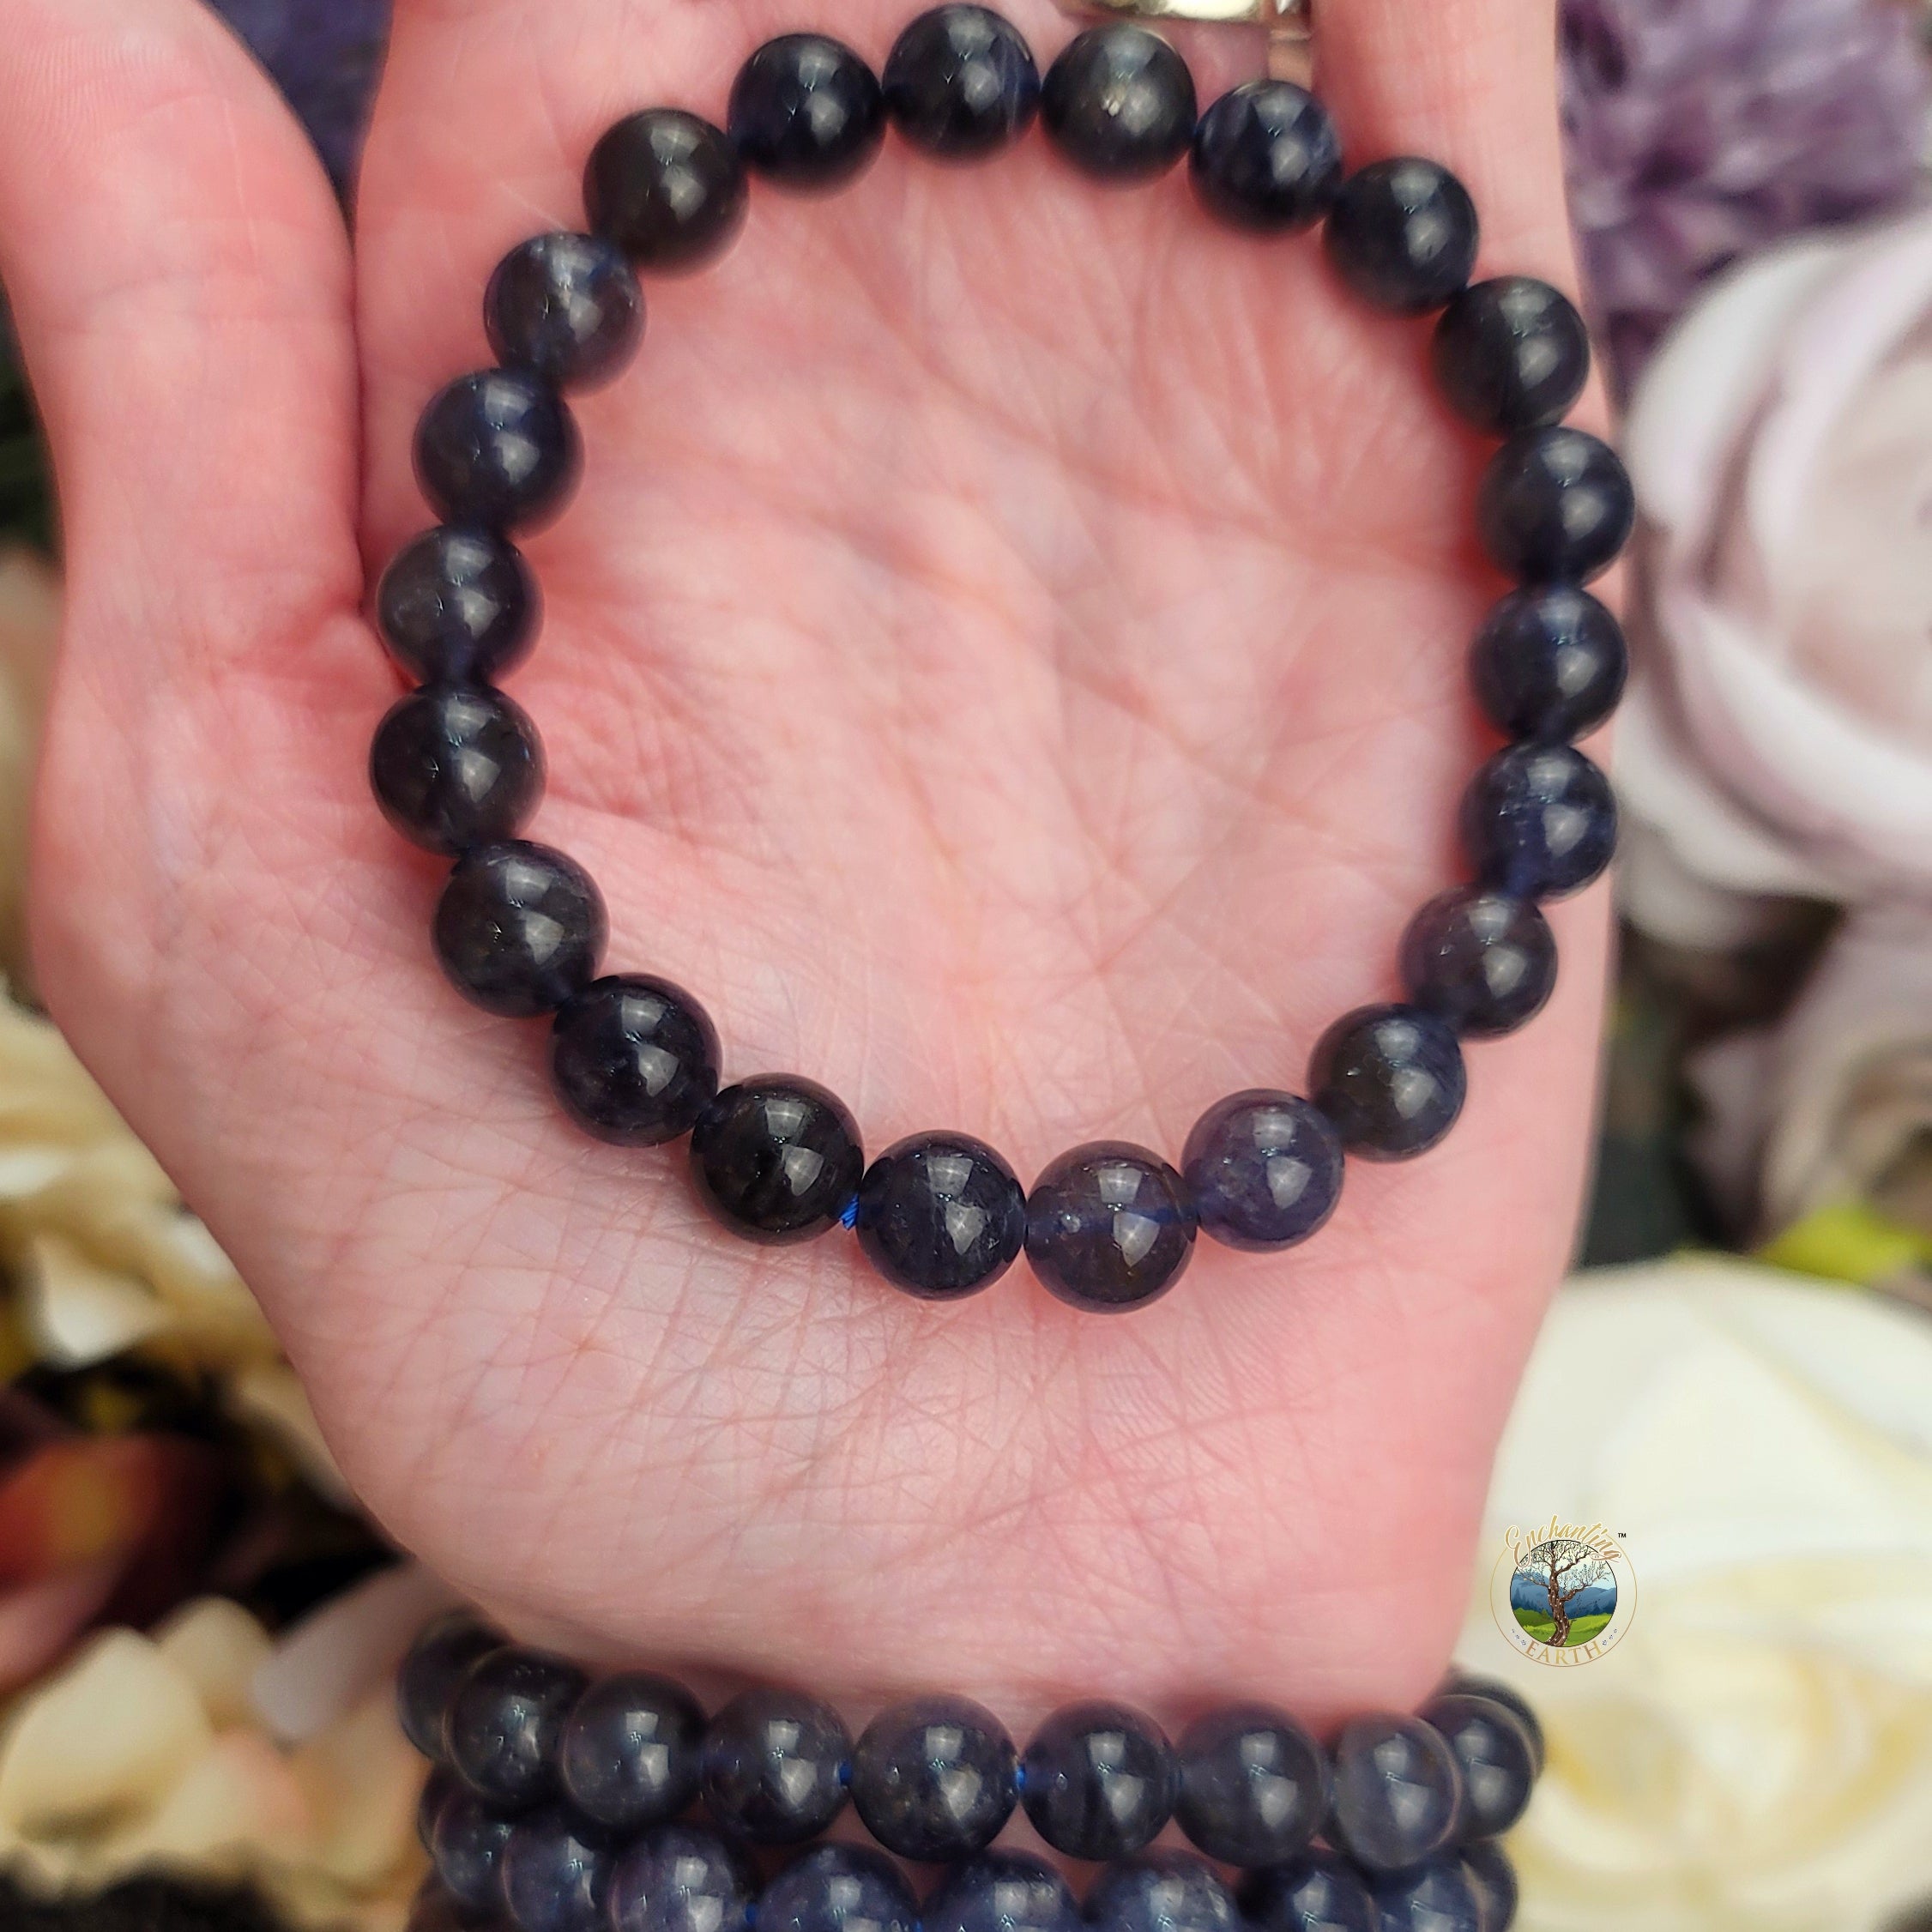 Iolite Flashy Bracelet (Gemmy & High Quality) for Sharp Intuition & Visions